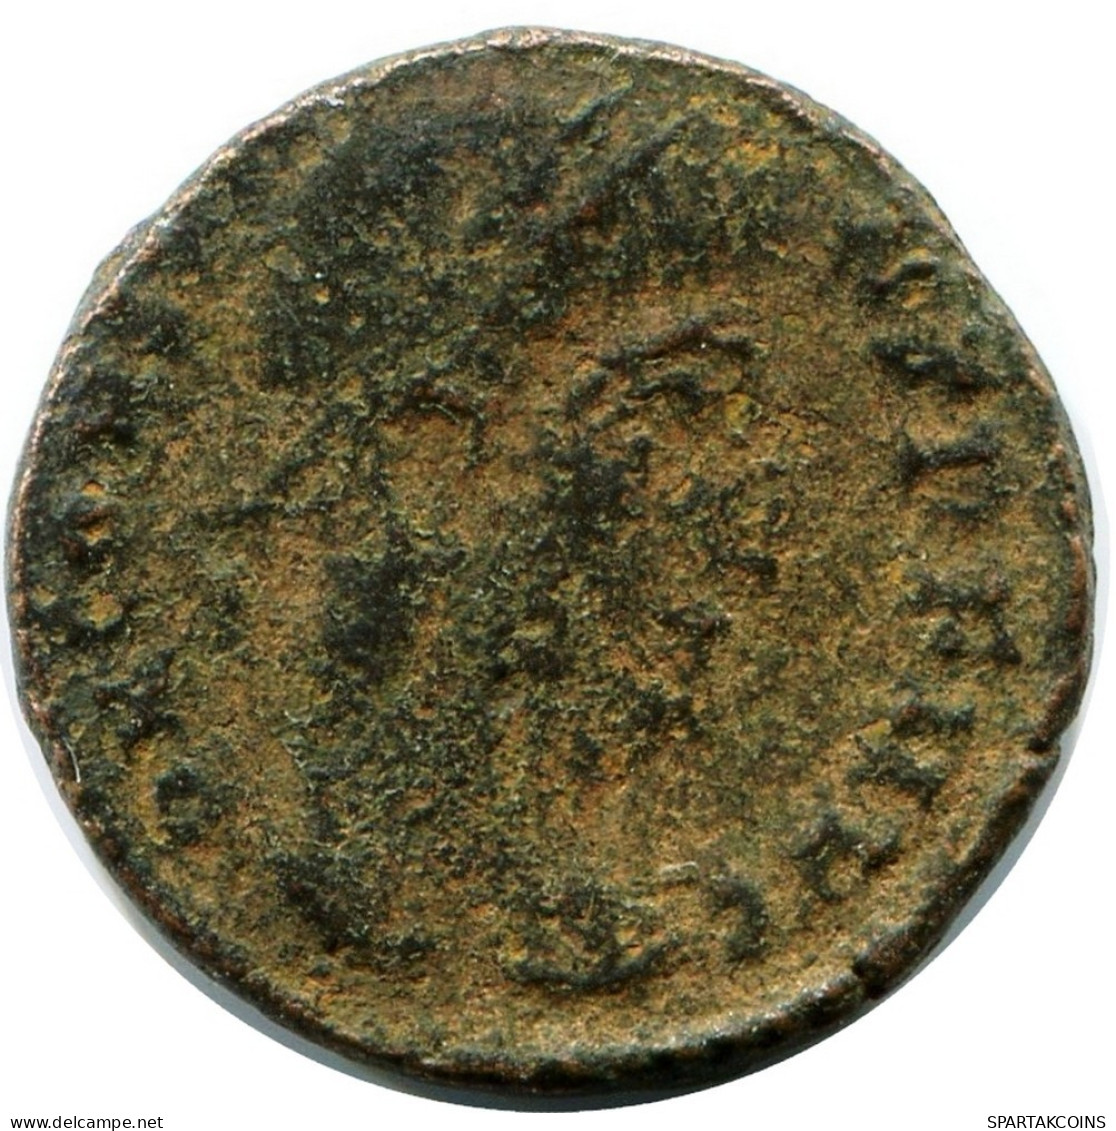 CONSTANS MINTED IN CYZICUS FROM THE ROYAL ONTARIO MUSEUM #ANC11684.14.E.A - El Imperio Christiano (307 / 363)